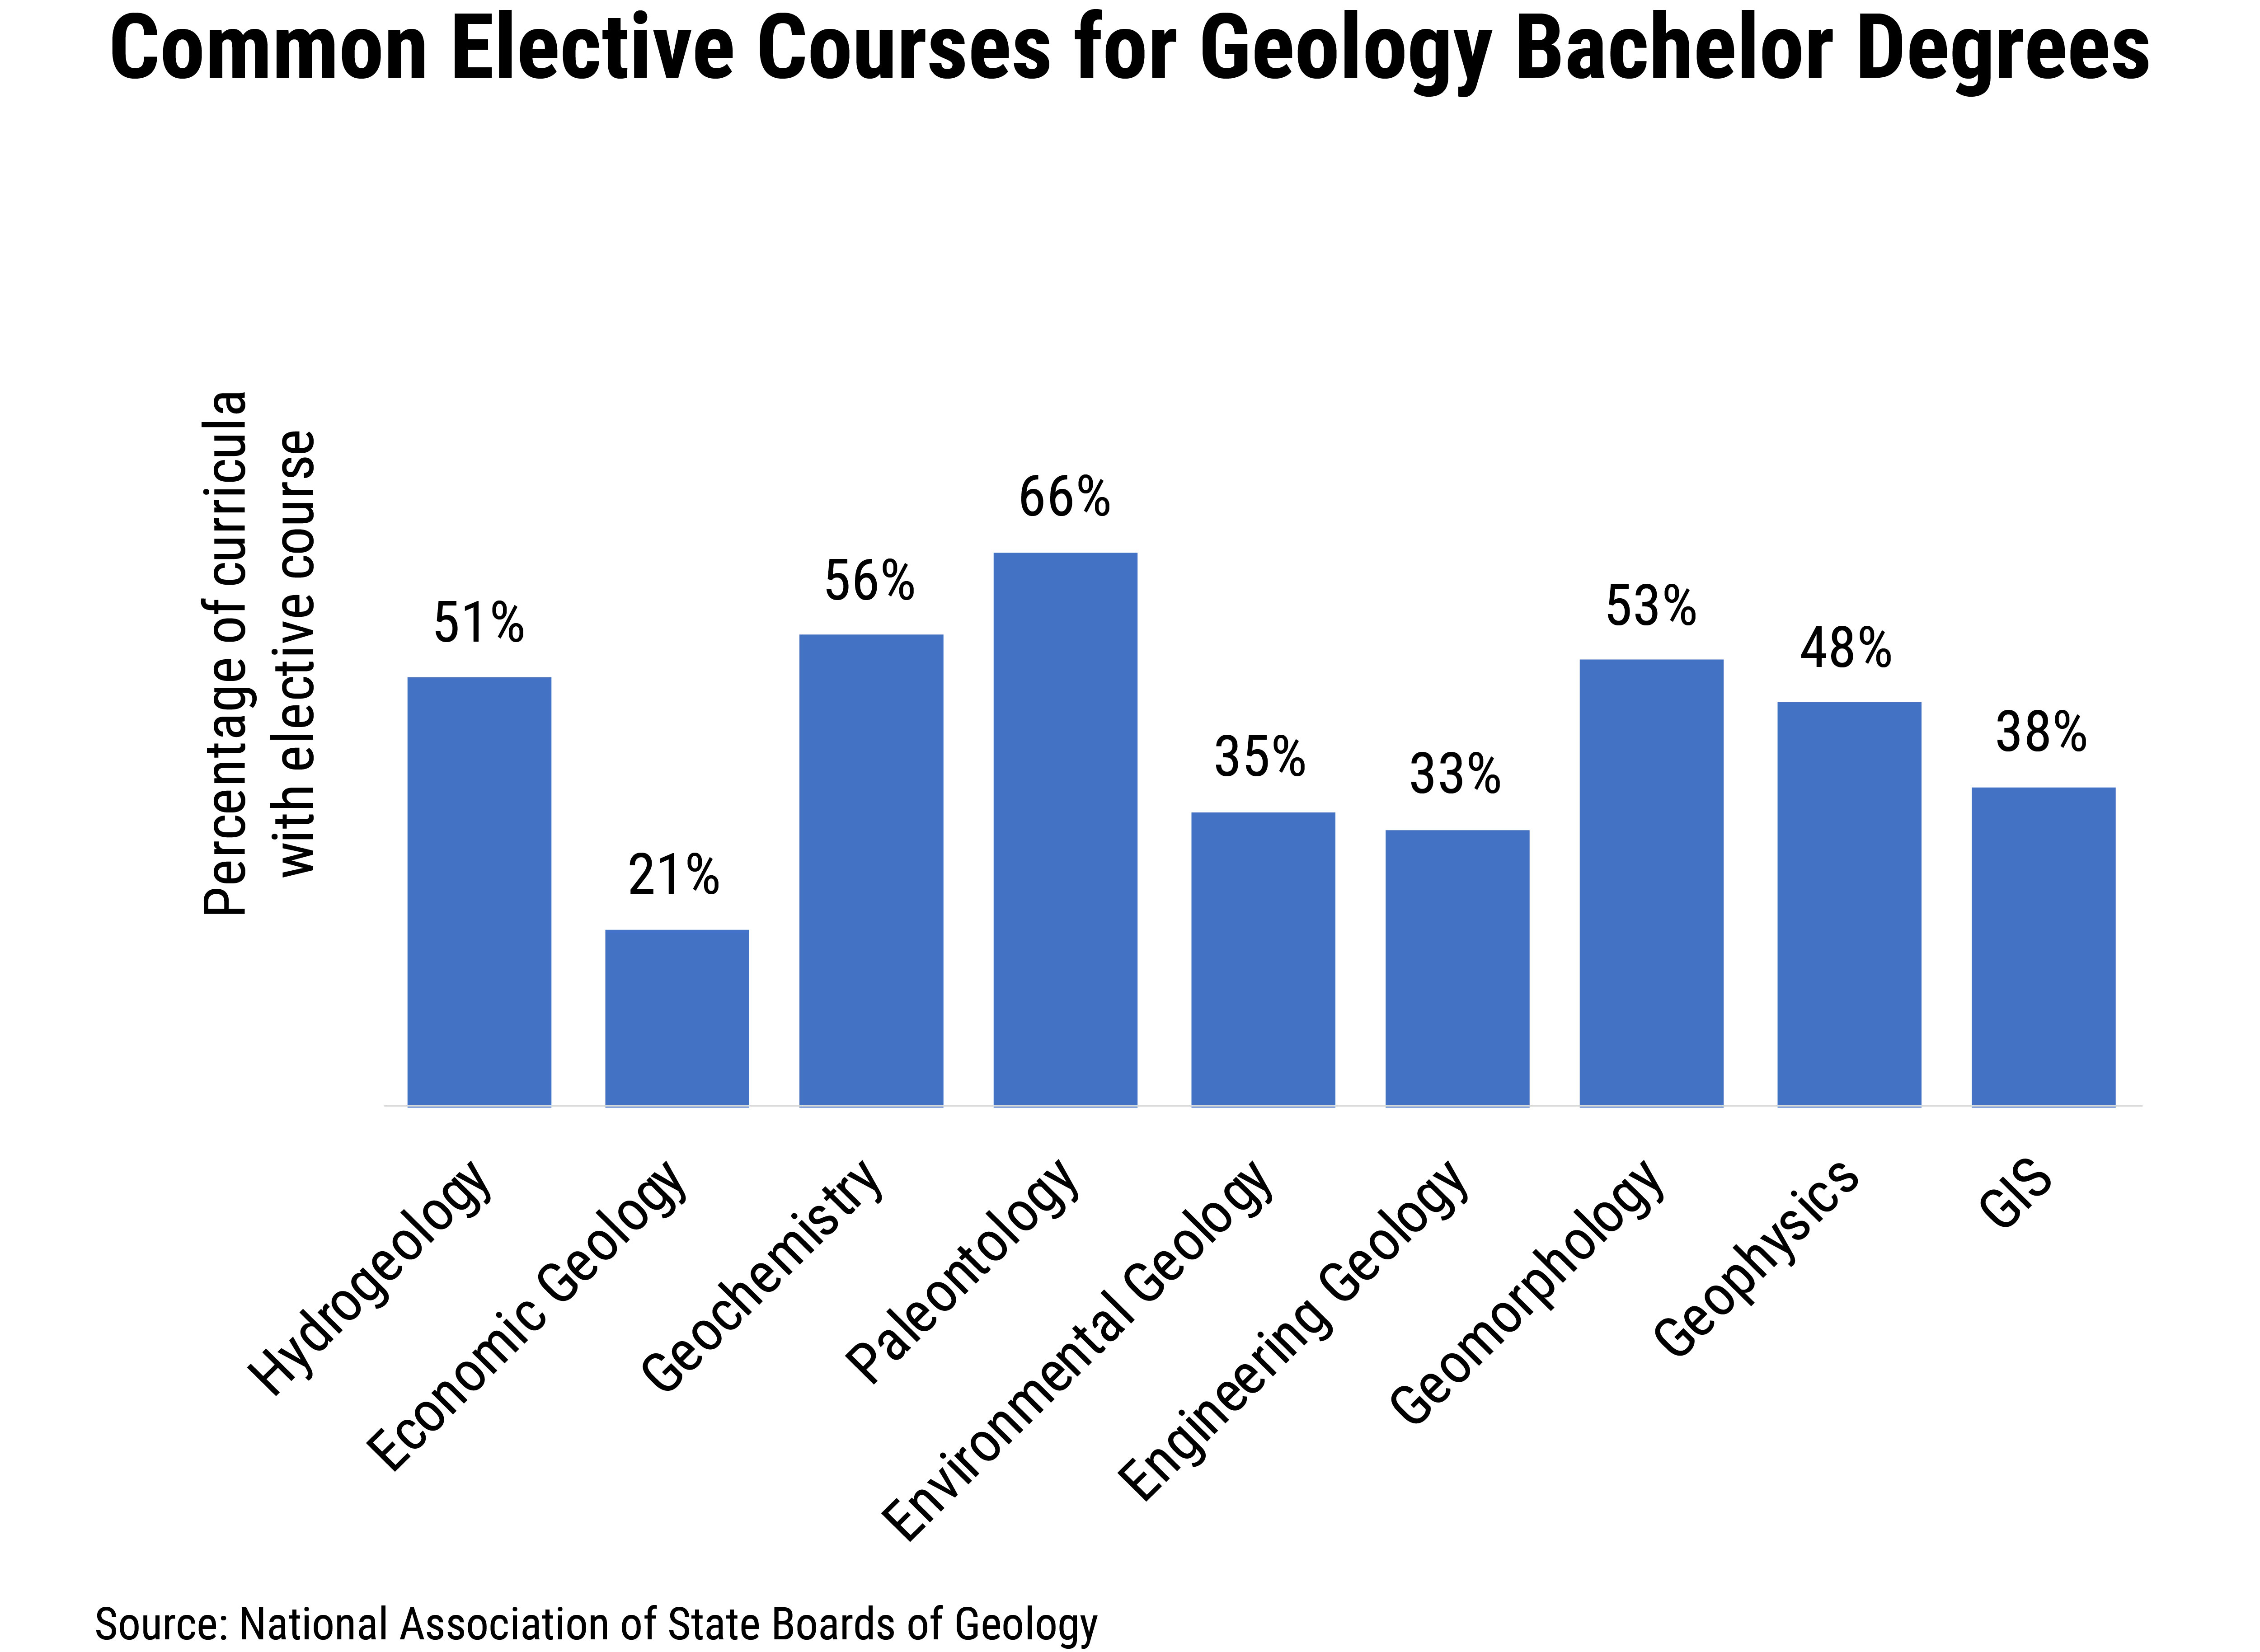 FS_2019-002 chart 2: Common Elective Courses for Geology Bachelor Degrees (Credit: ASBOG)